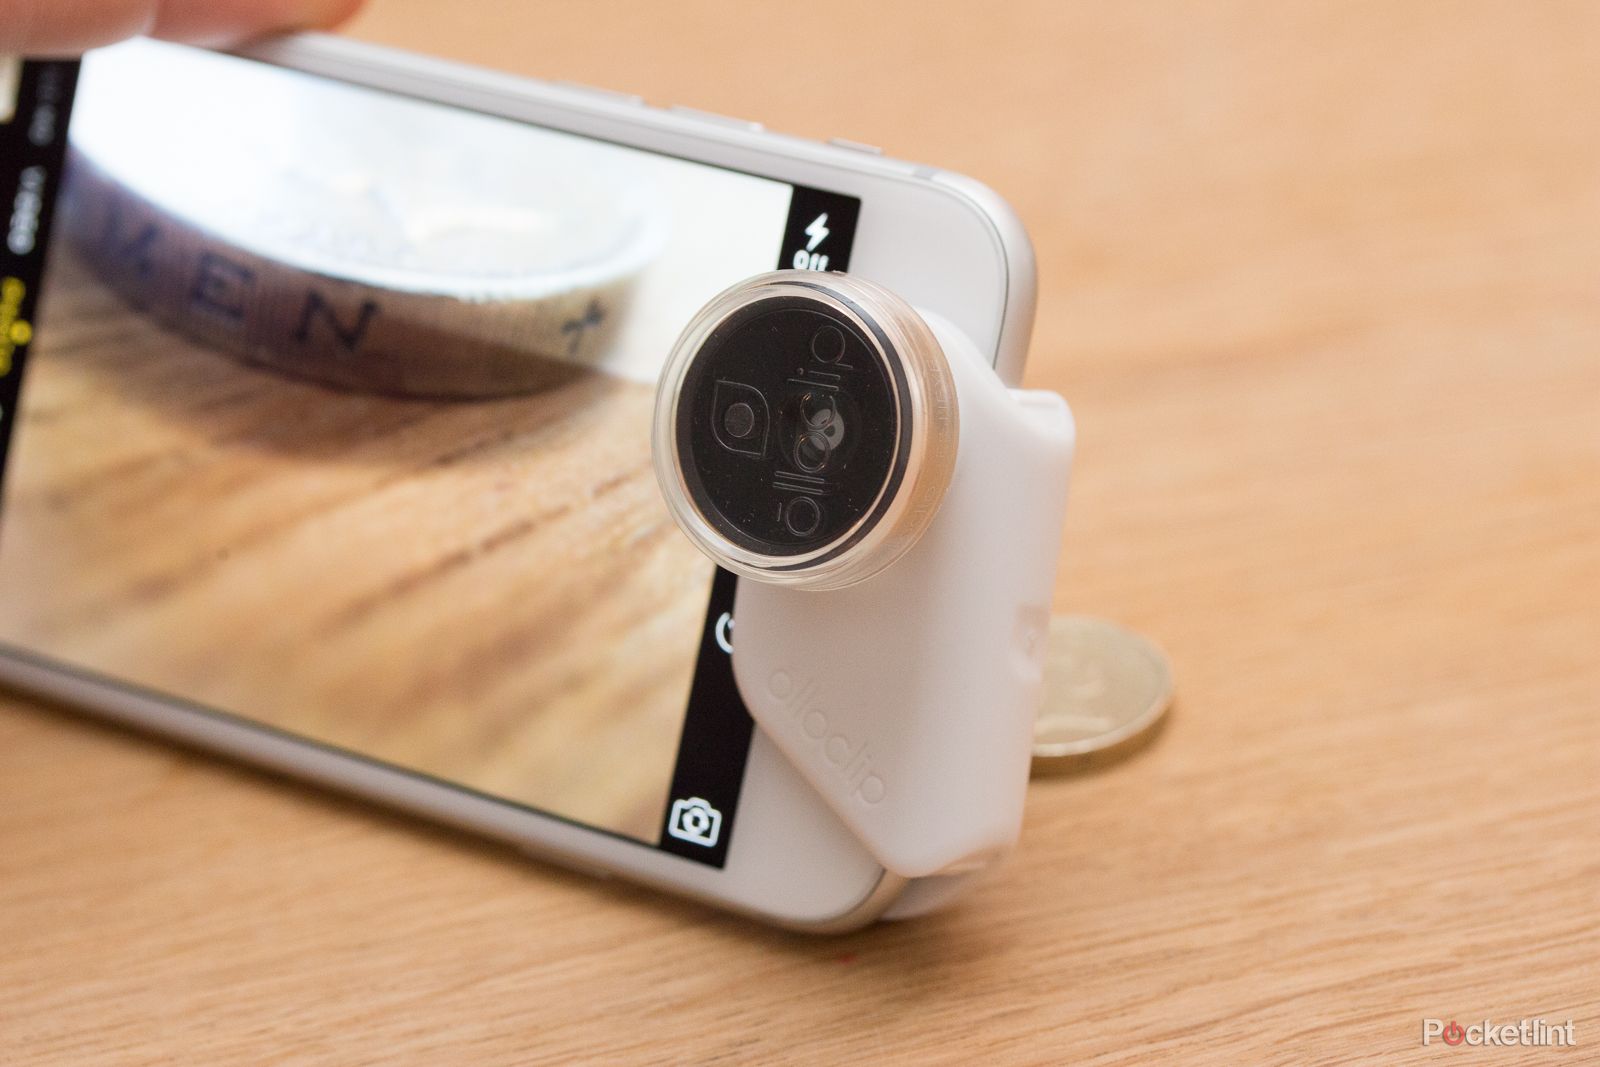 olloclip 4 in 1 lens for iphone 6 and iphone 6 plus review making your iphone camera better image 1